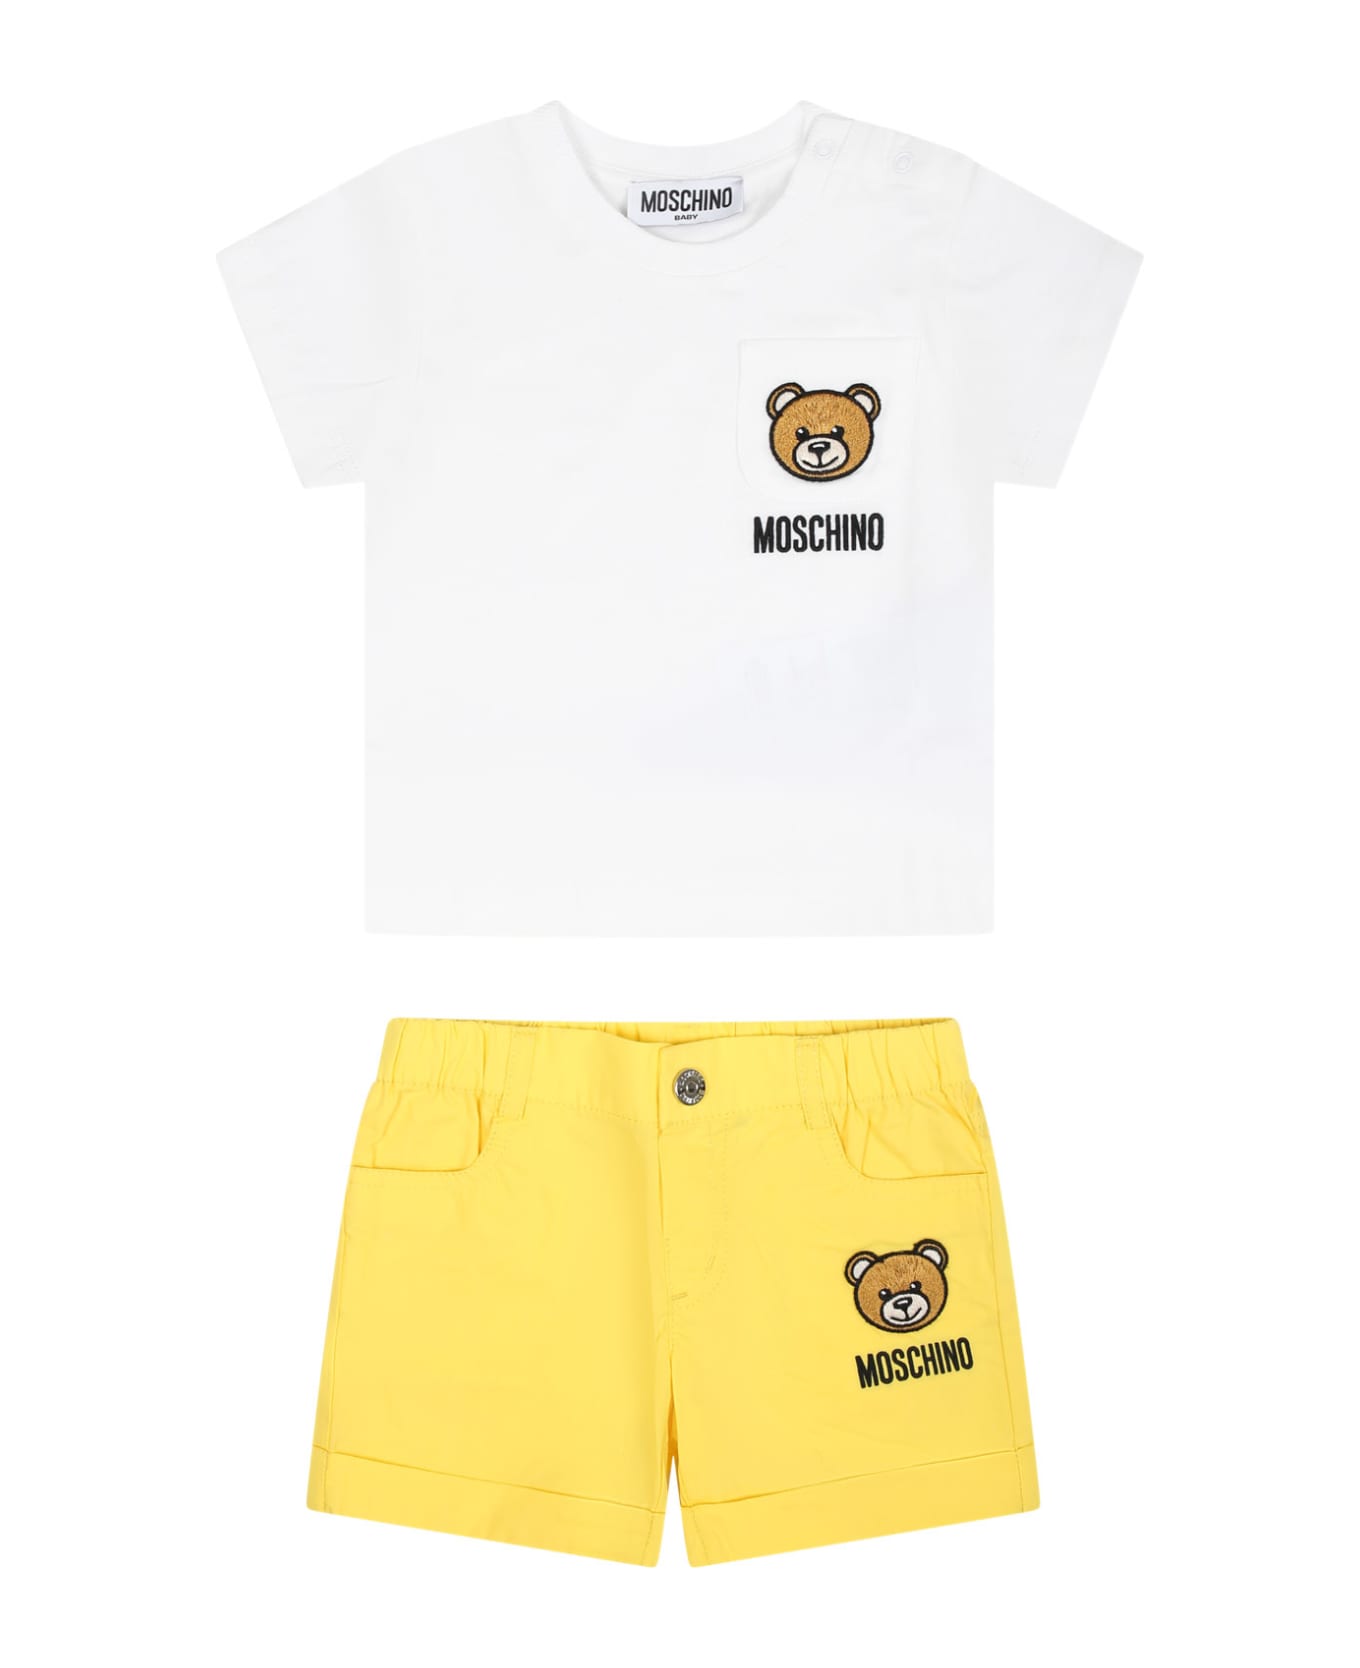 Moschino Multicolor Sports Suit For Baby Kids - Multicolor ボトムス